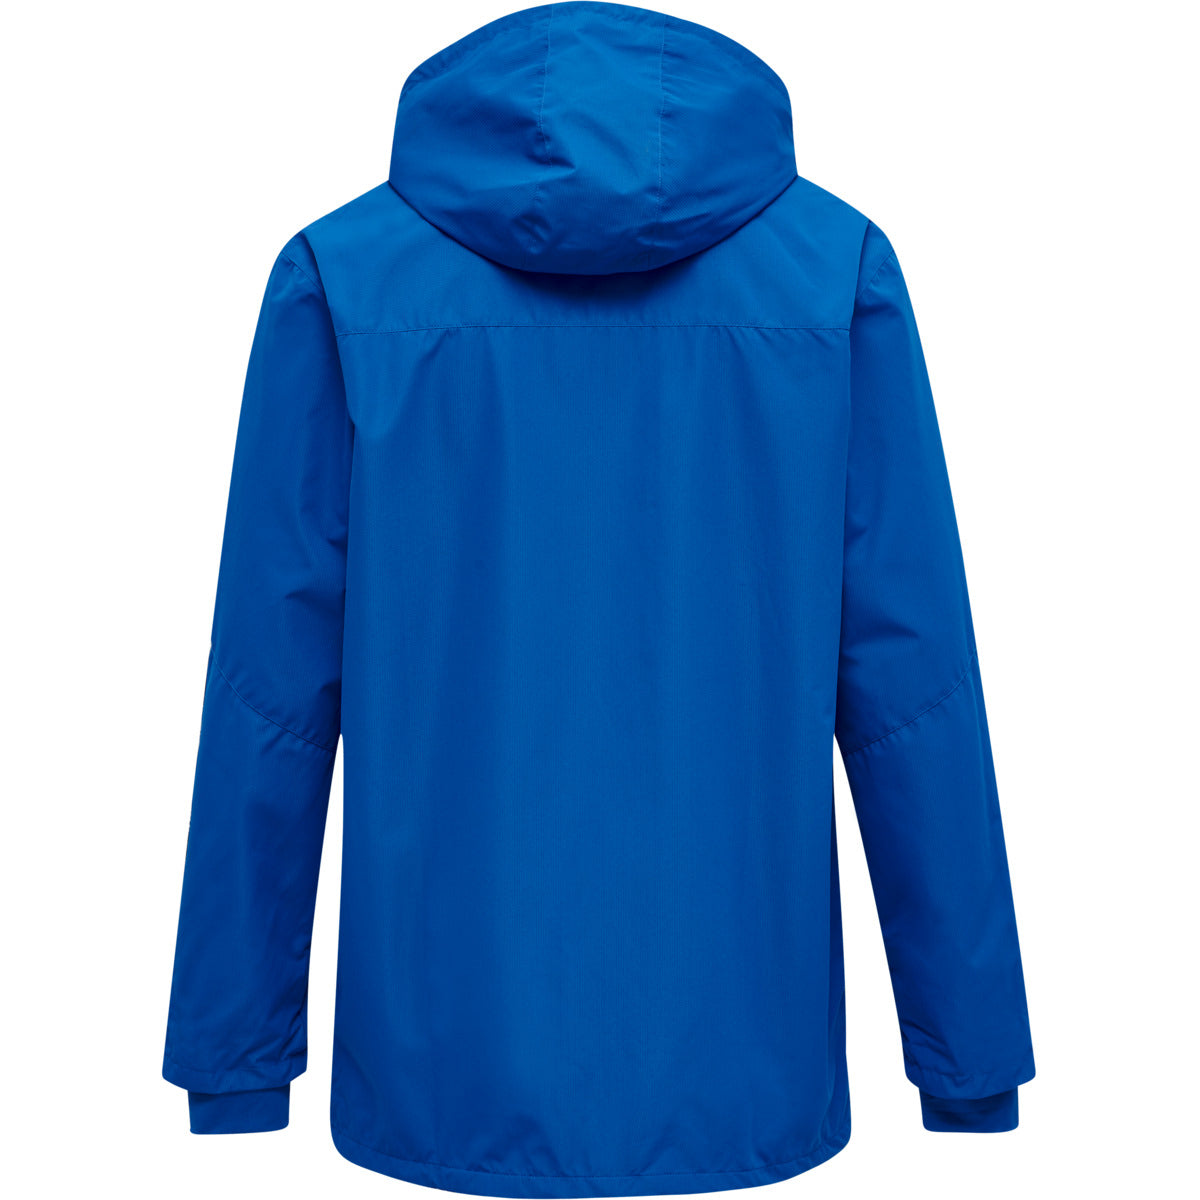 hmlAUTHENTIC ALL-WEATHER JACKET TRUE BLUE